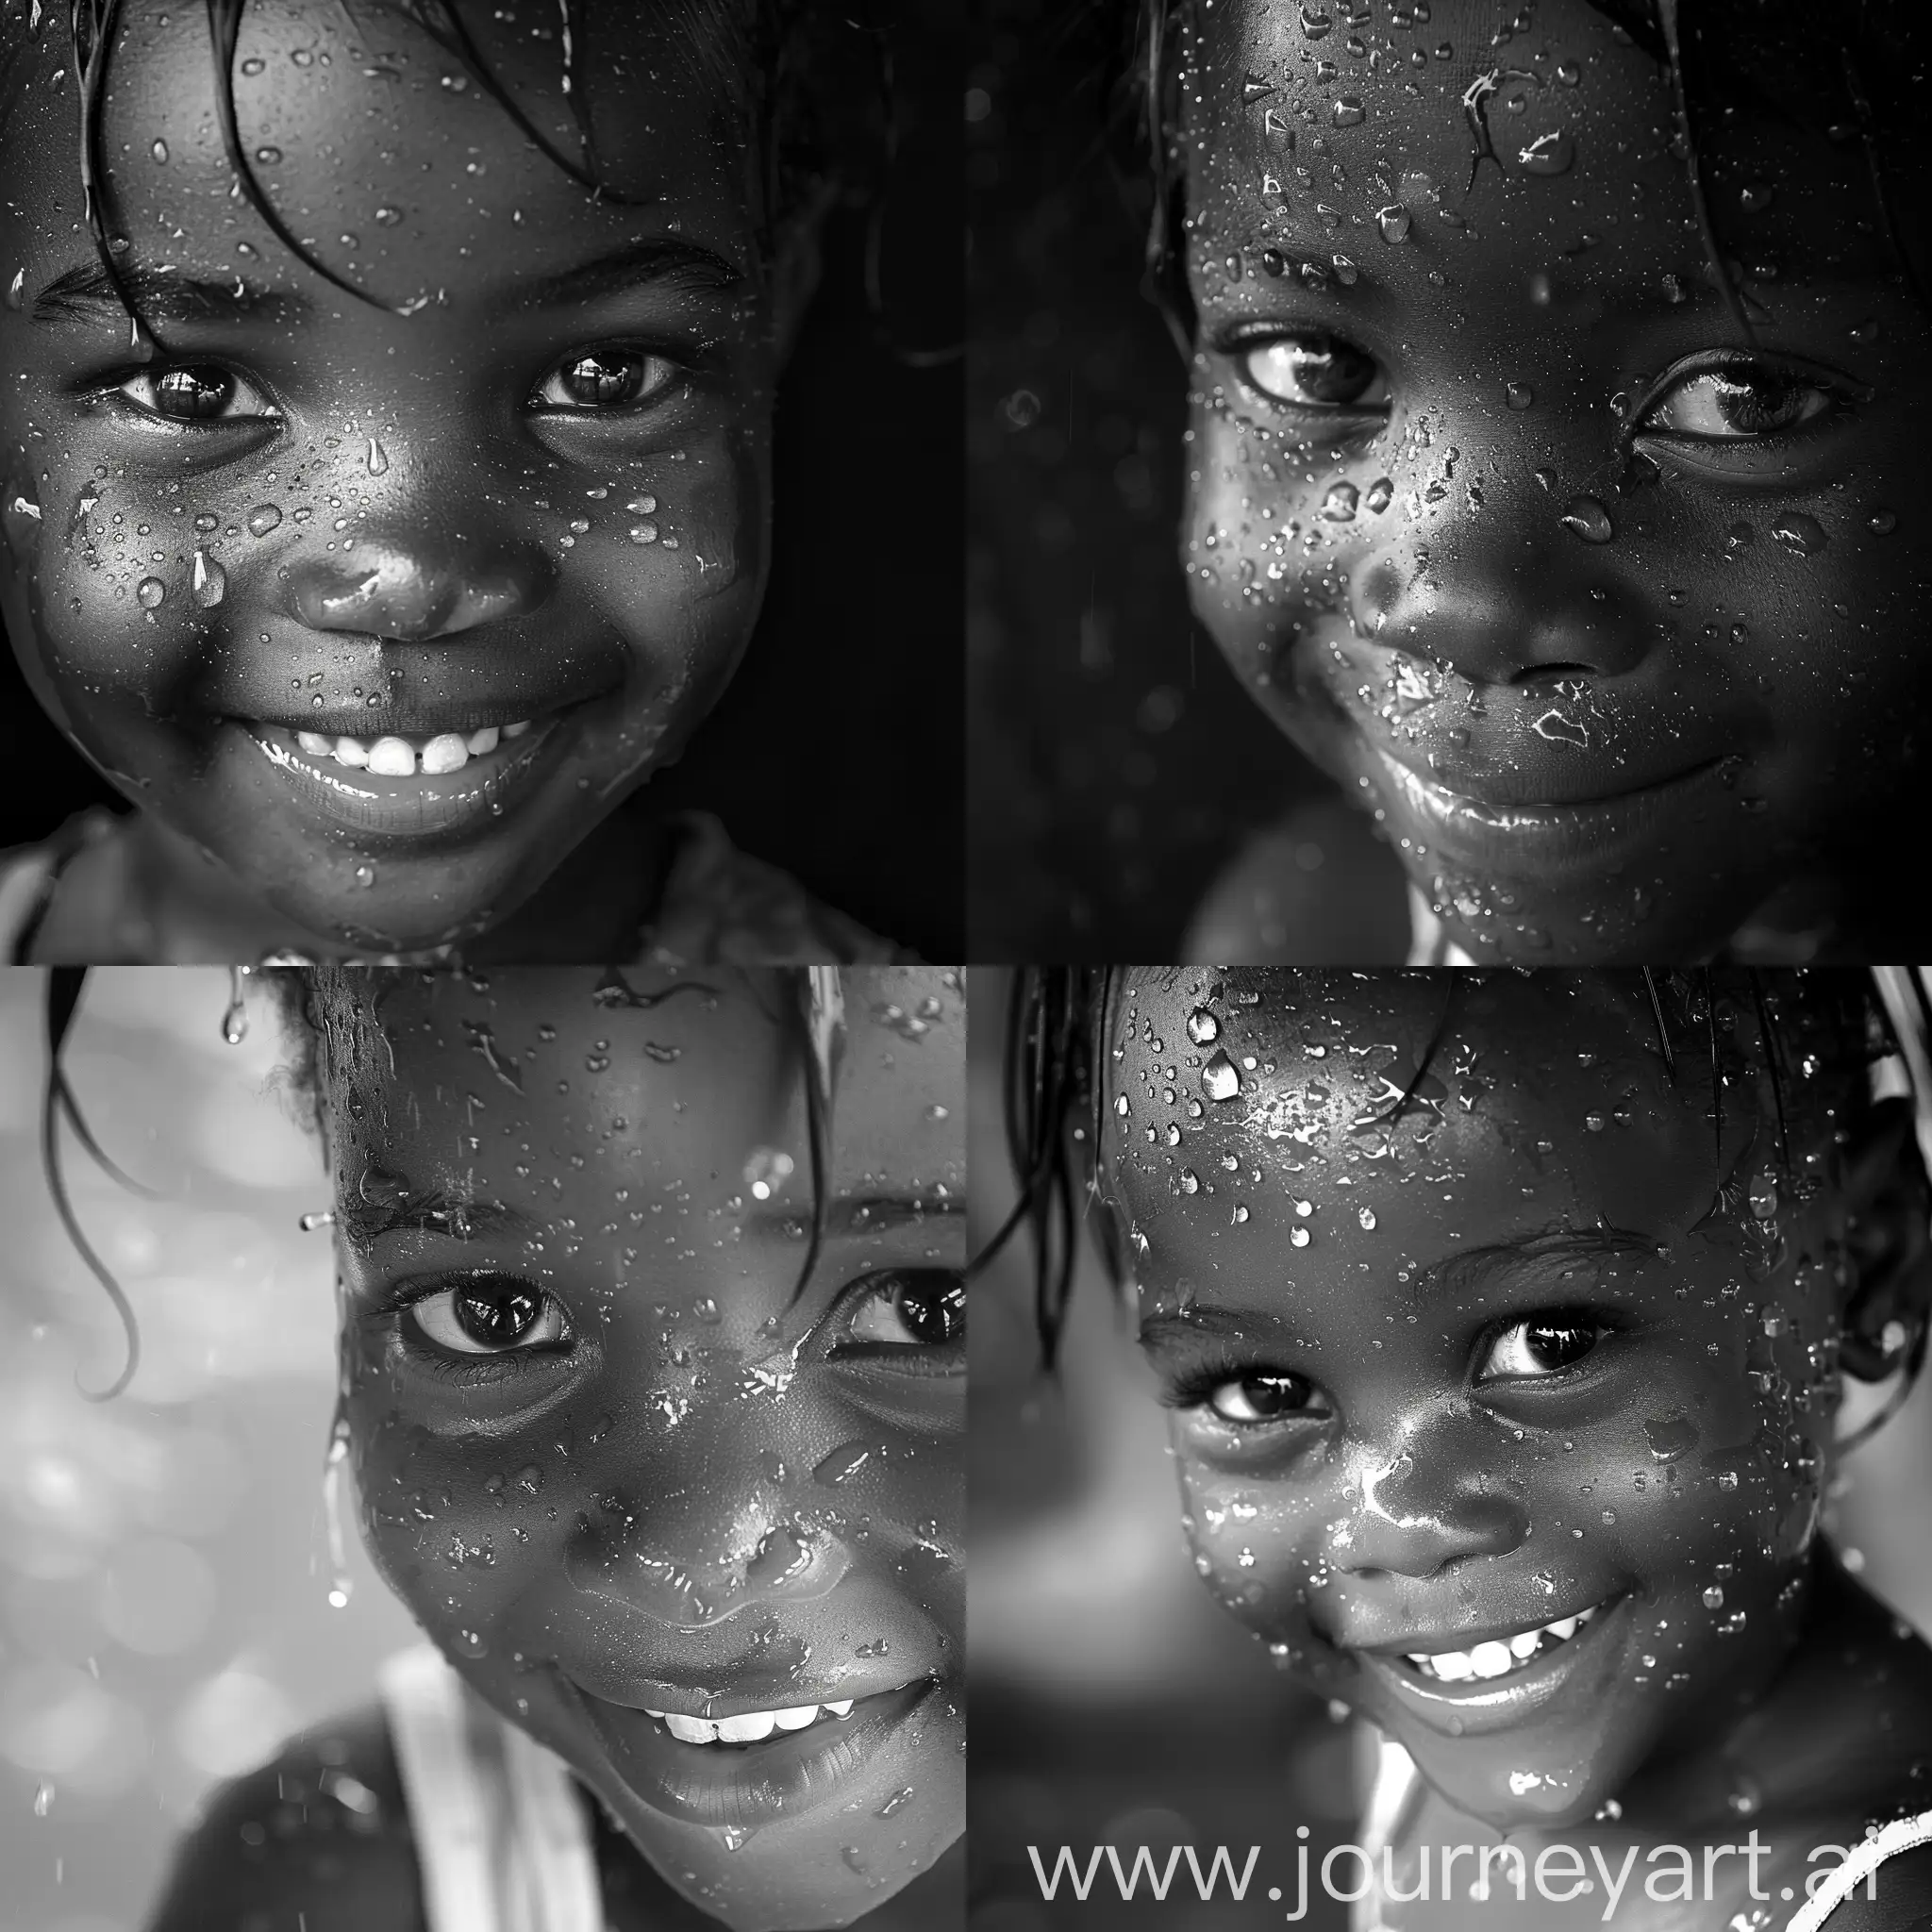 Portrait of African little girl. She has water droplets on her face. And she is smiling. She is looking at the camera.